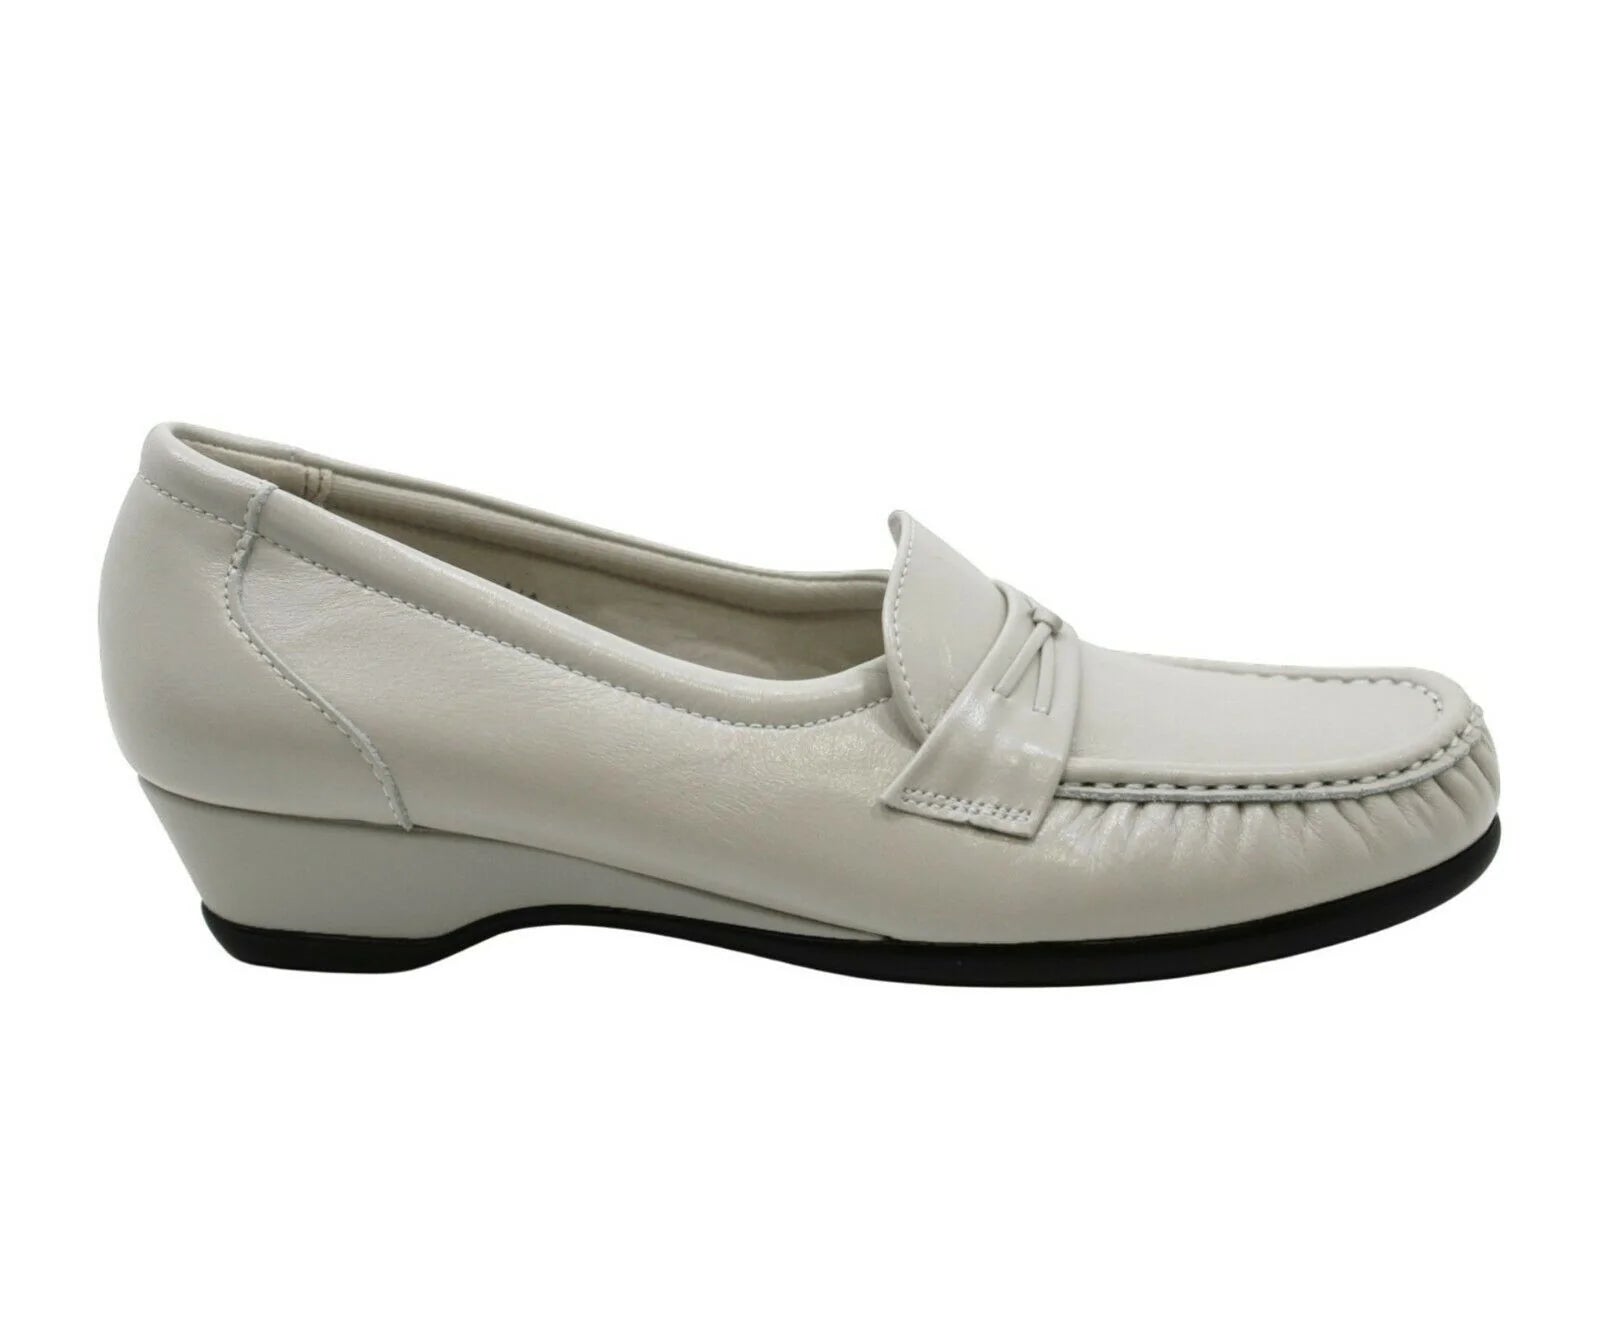 SAS Easier Womens Bone Leather Wedge Loafers Comfort Shoes US 5.5 Medium - SVNYFancy